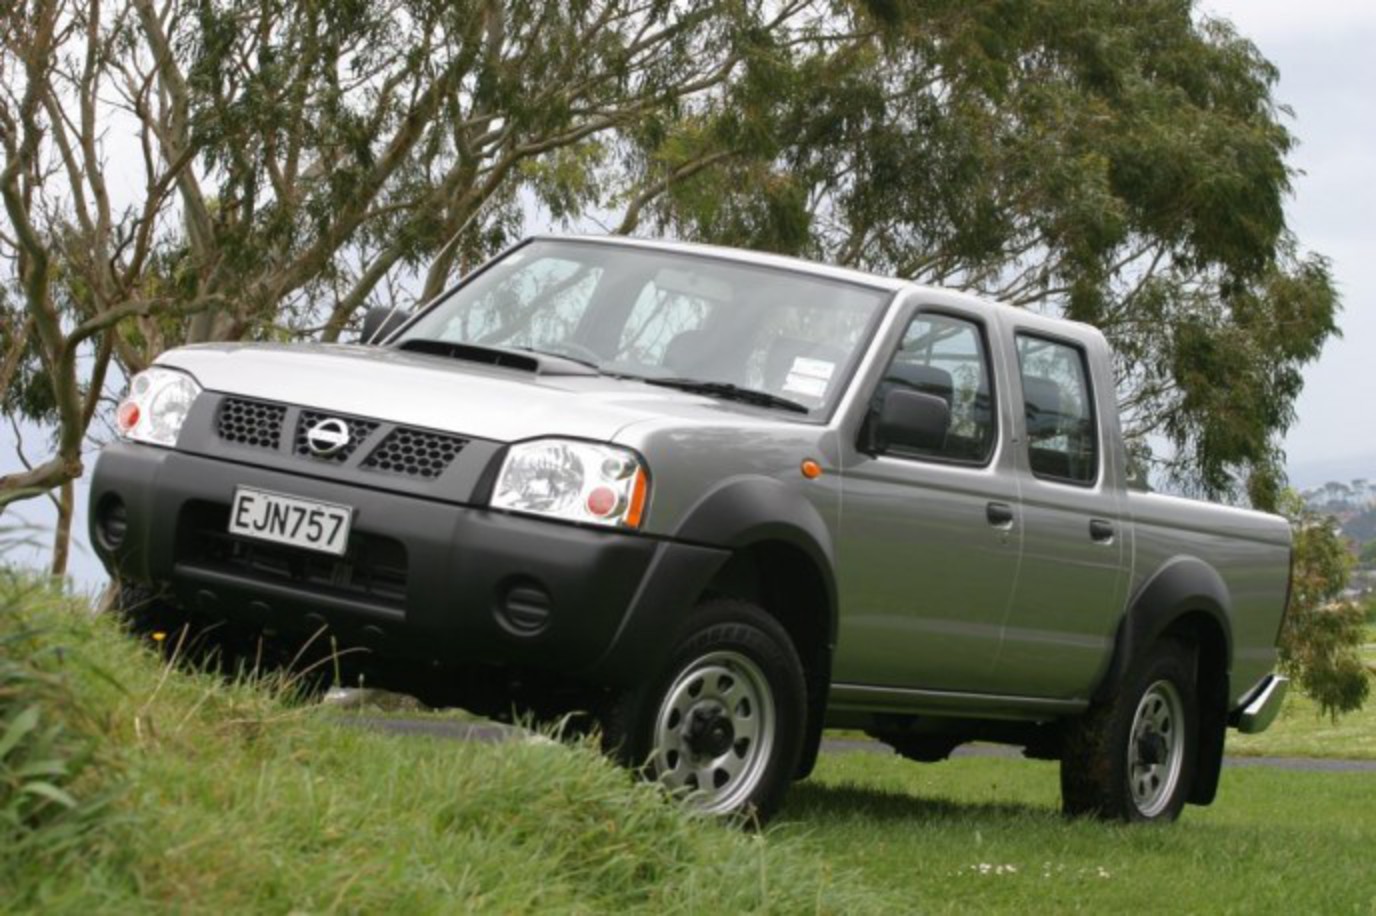 nissan-navara-dx-fq. Coming out of retirement is usually an activity